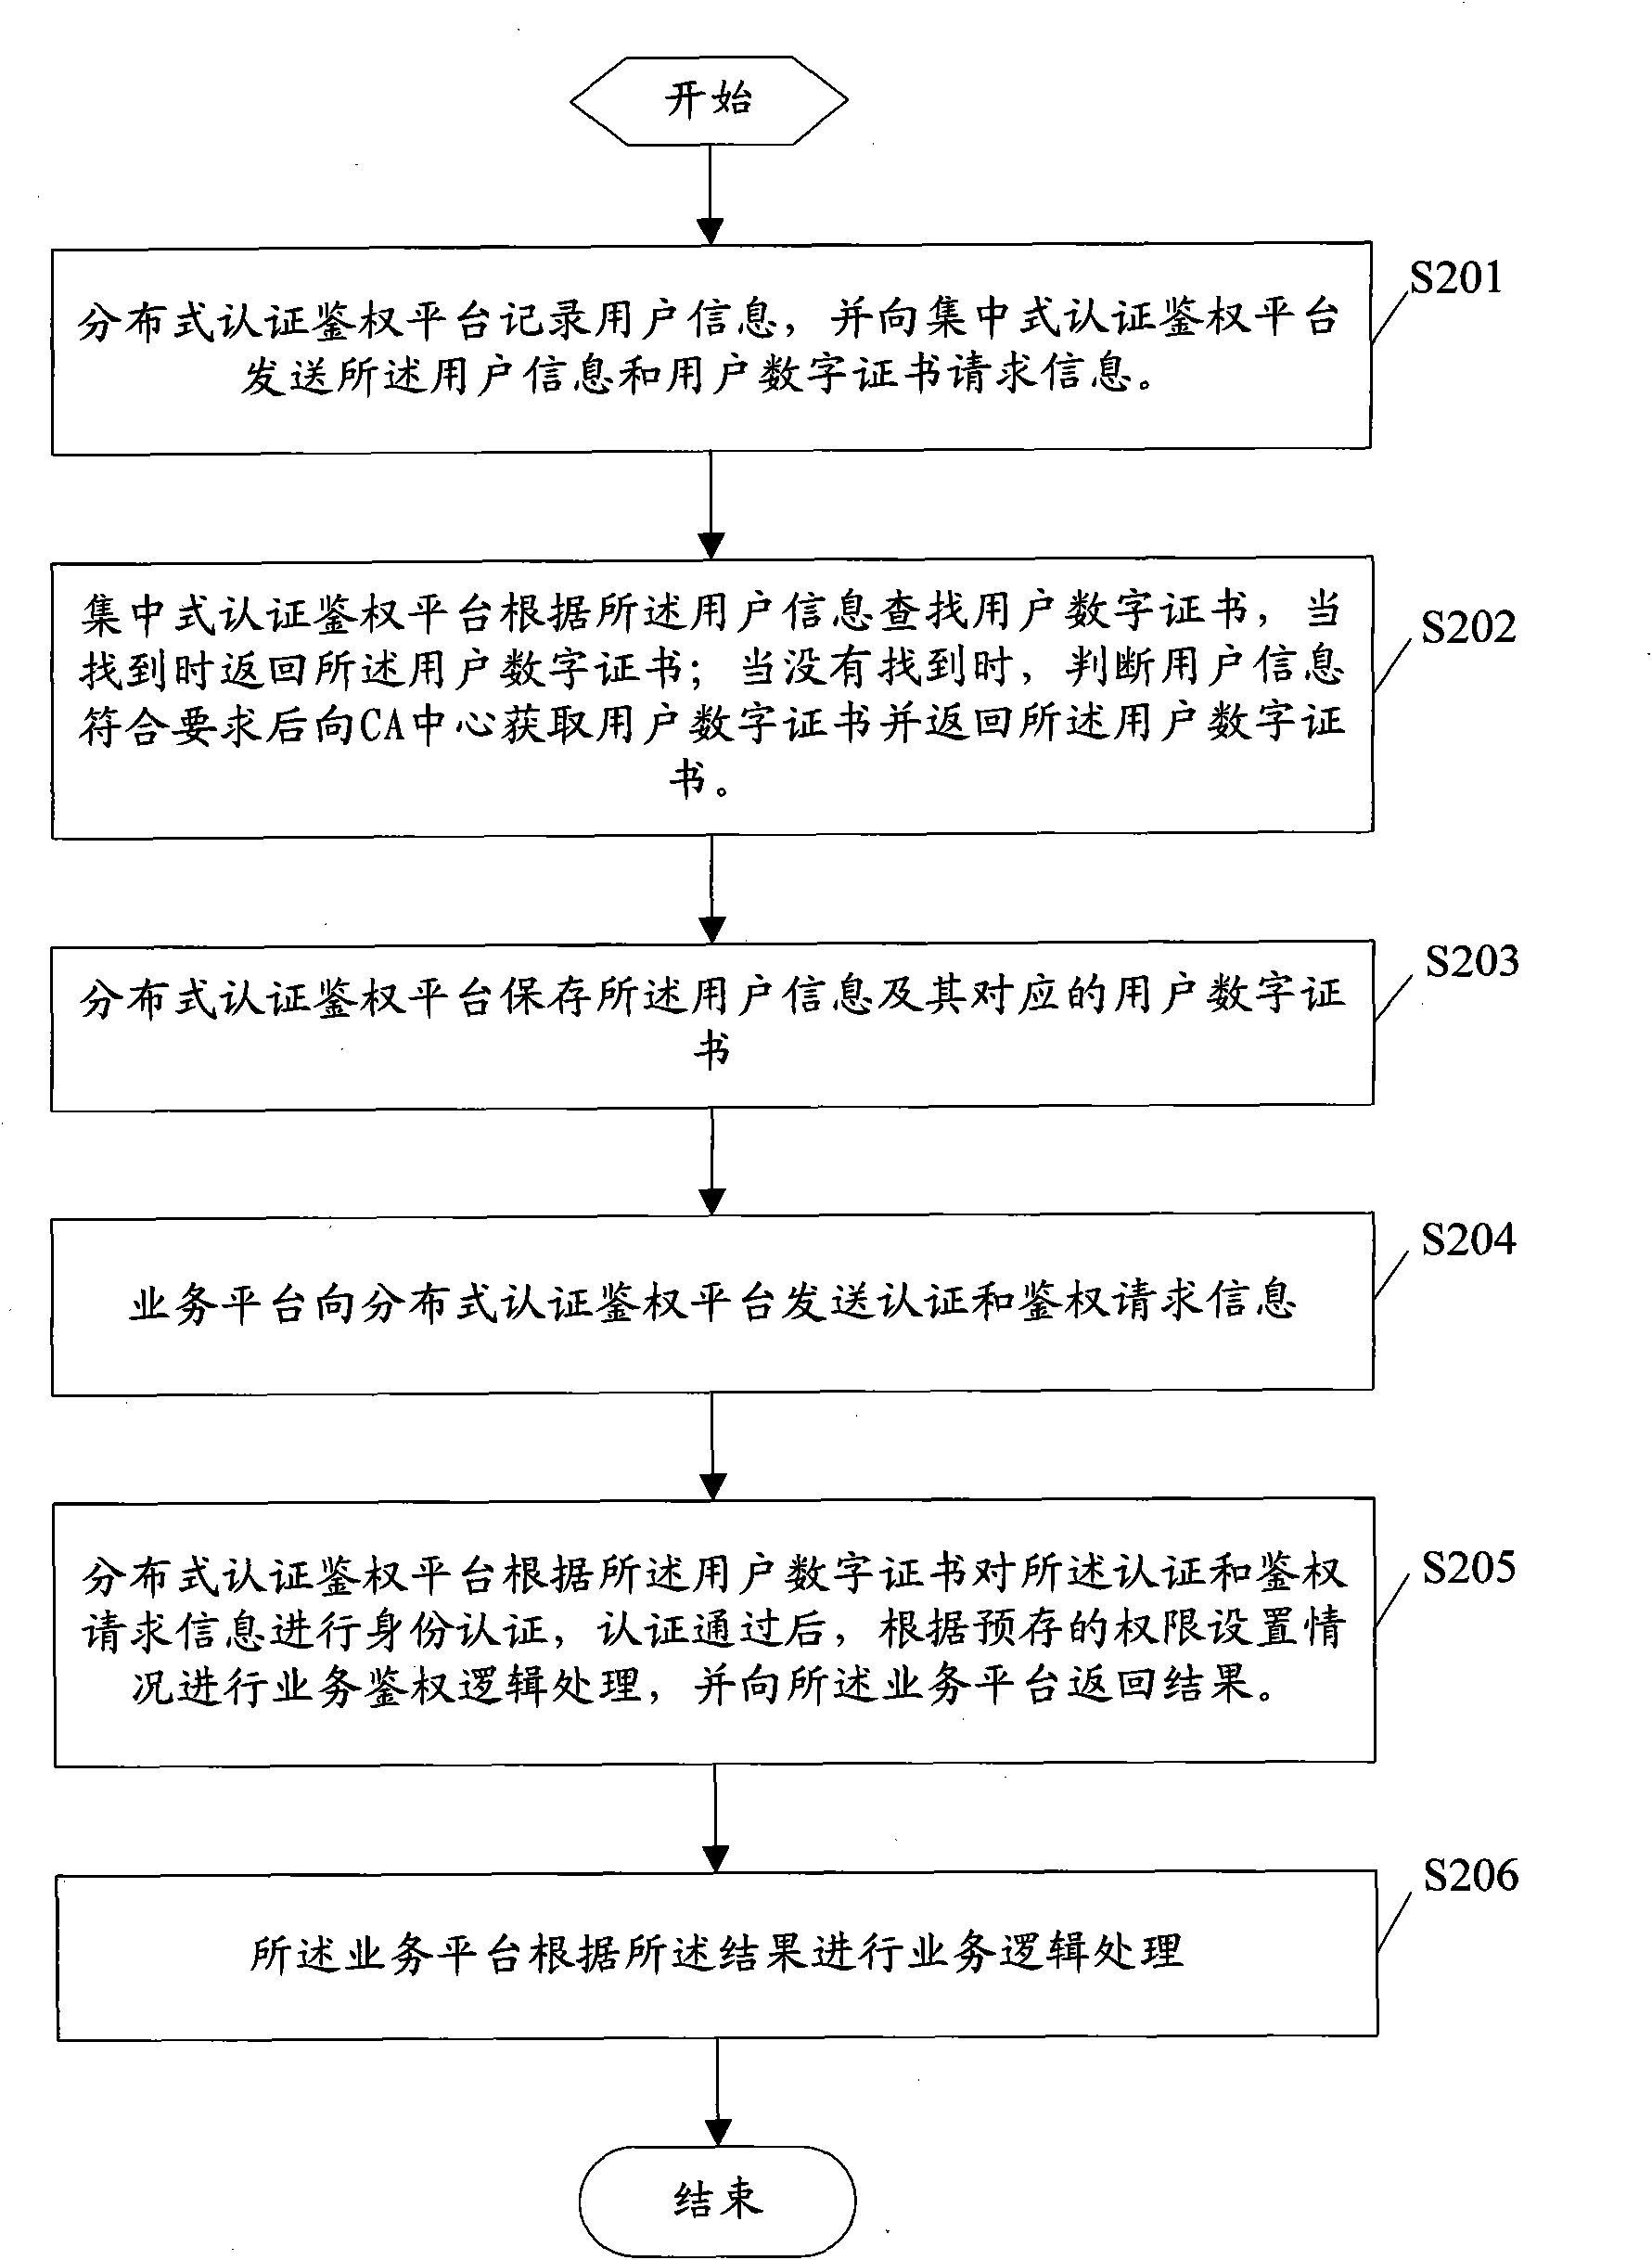 Distributive enterprise identification authentication method, system and embedded terminal